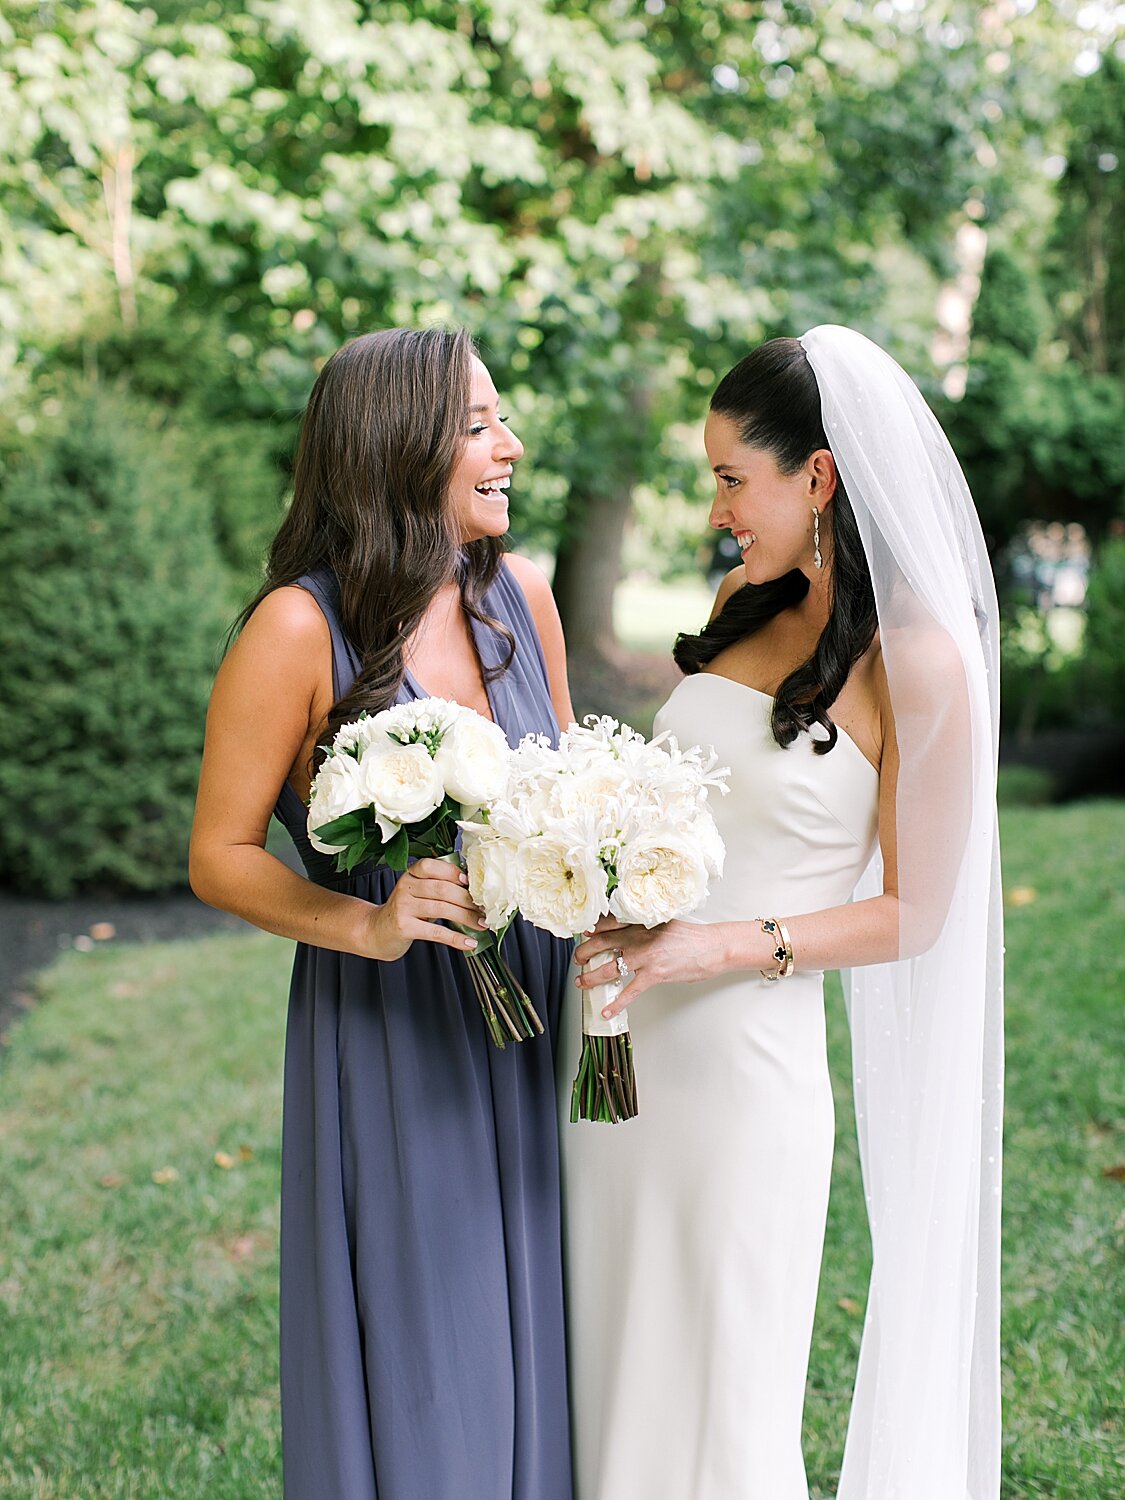 bridesmaid laughs with bride during NY wedding | Stylish Private Home Wedding Inspiration | Asher Gardner Photography